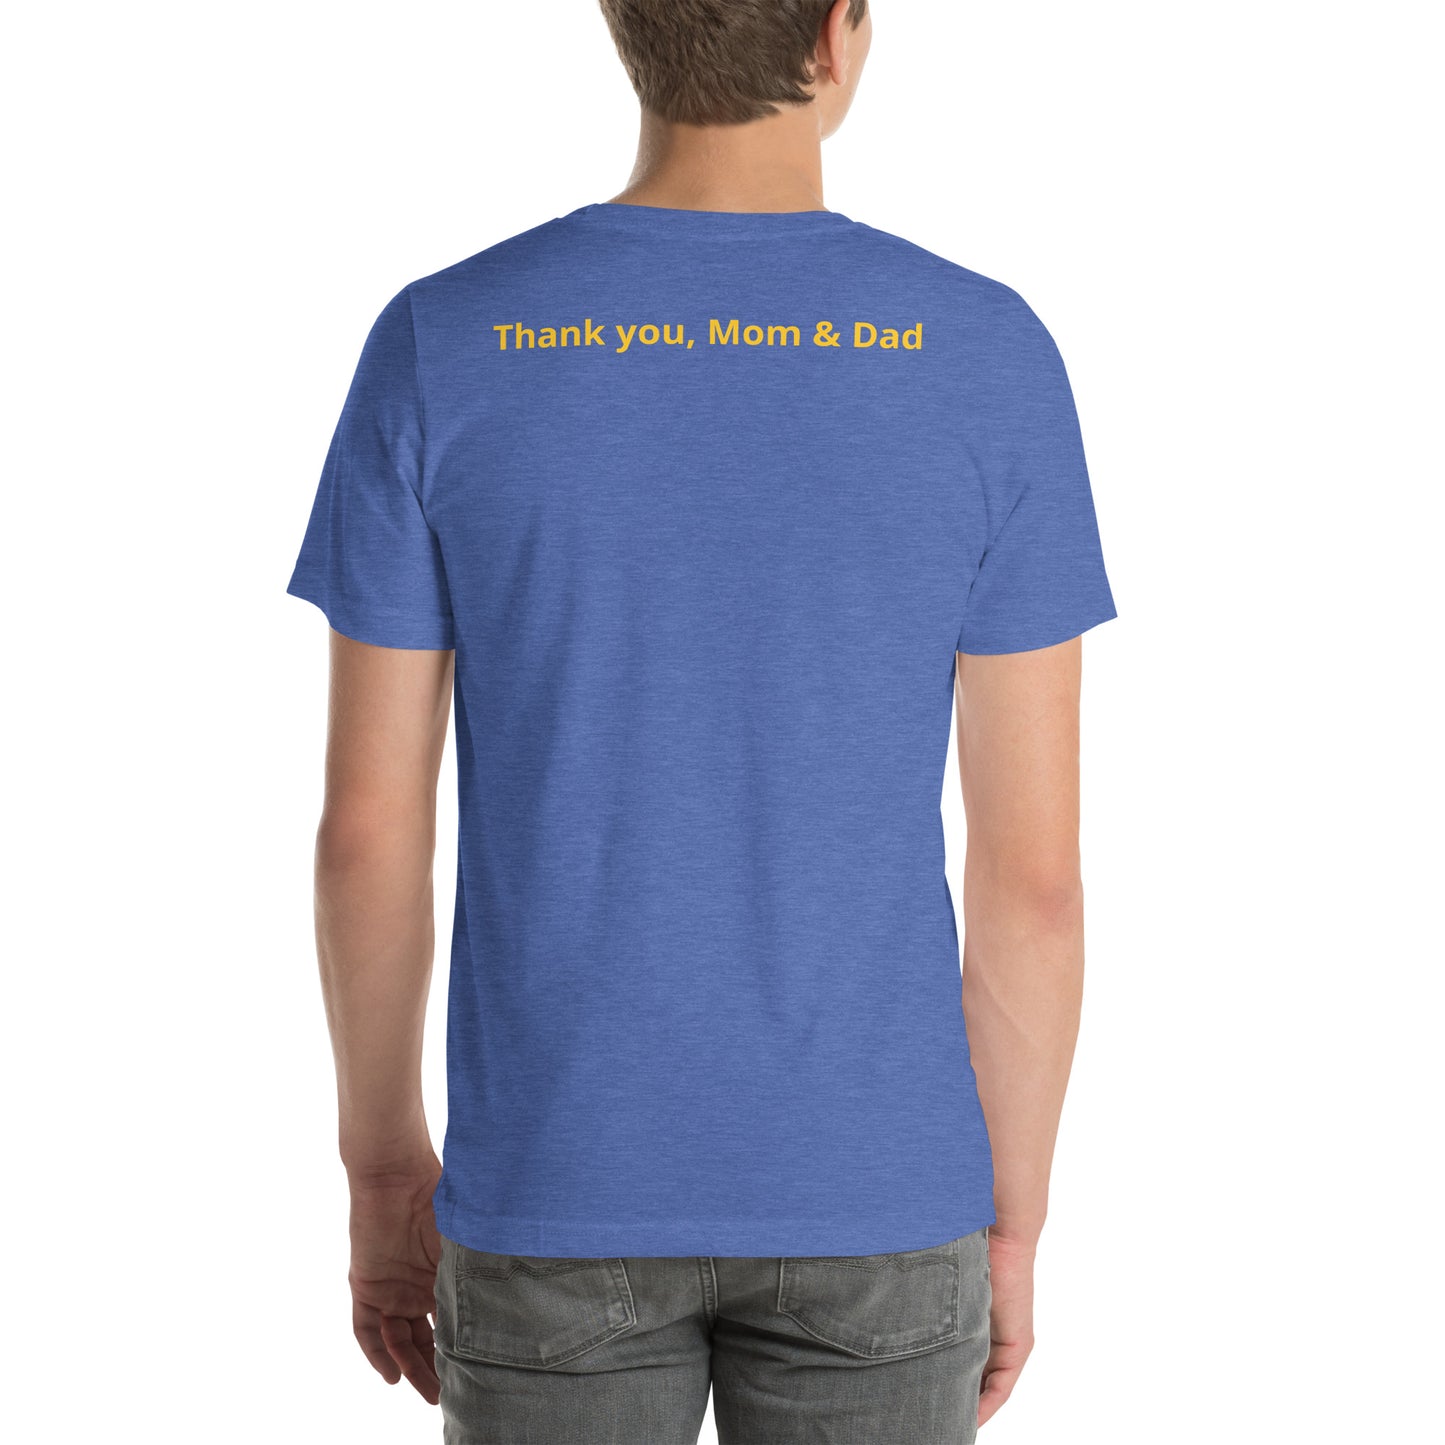 Blue color short sleeve tee shirt that says "College '24 Grad" on the front and "Thank you, Mom & Dad" on the back in yellow font